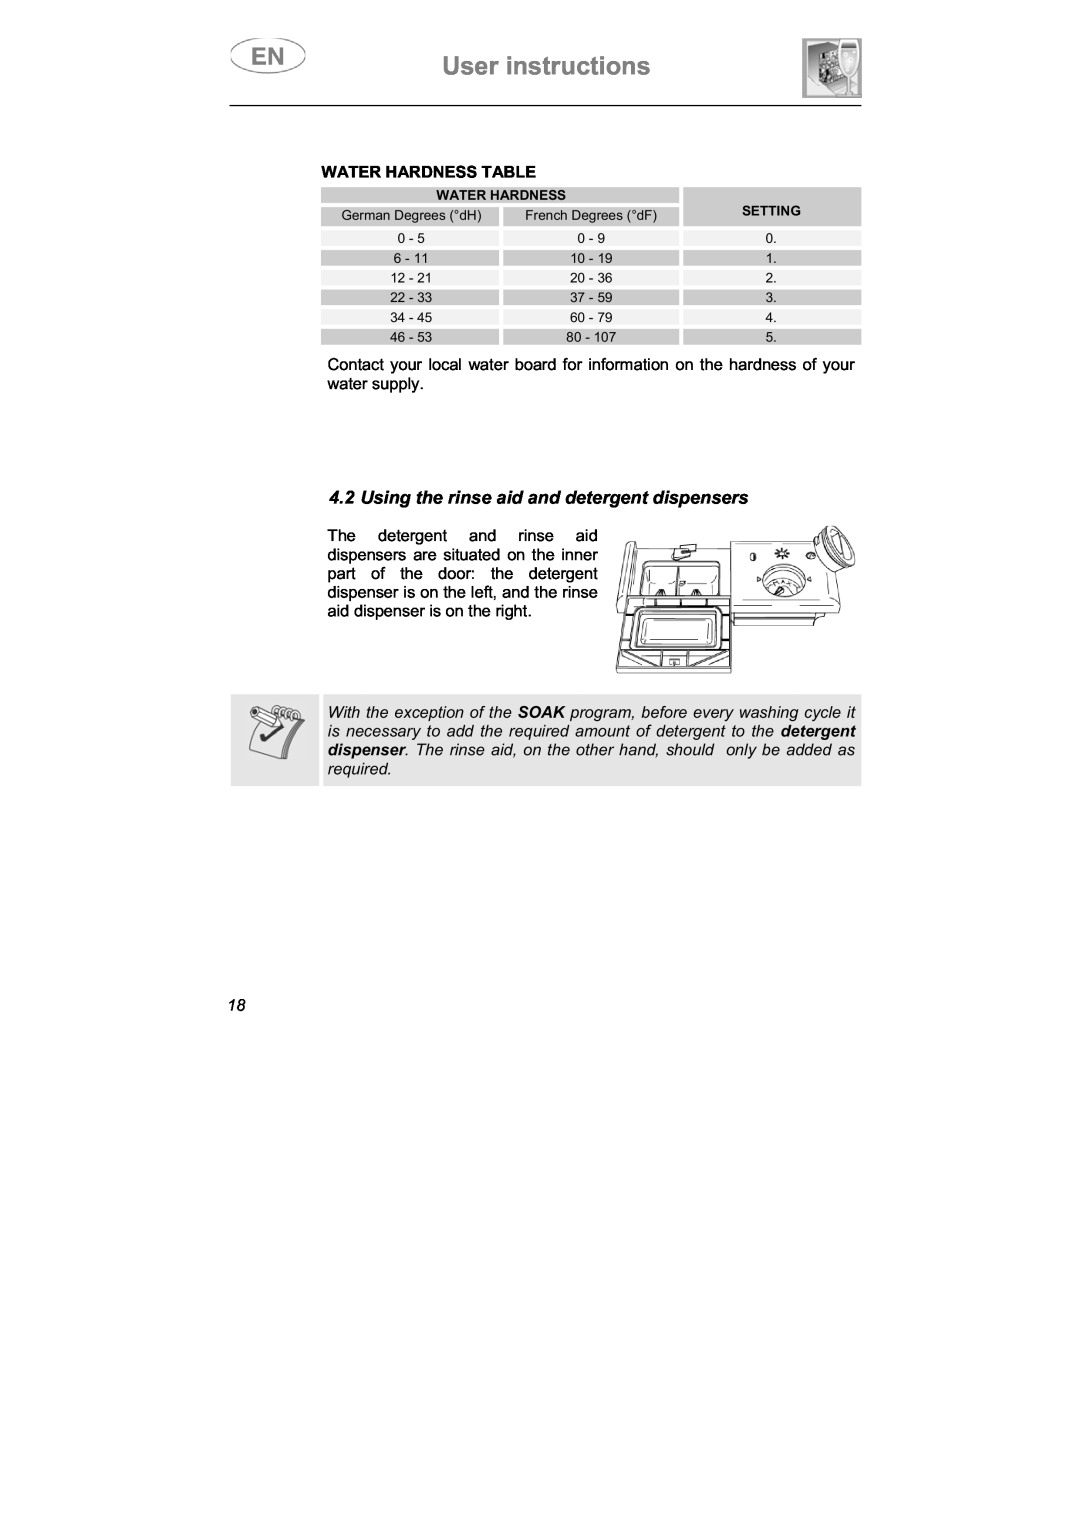 Smeg LSPX1253 manual User instructions, Using the rinse aid and detergent dispensers, Water Hardness Table 